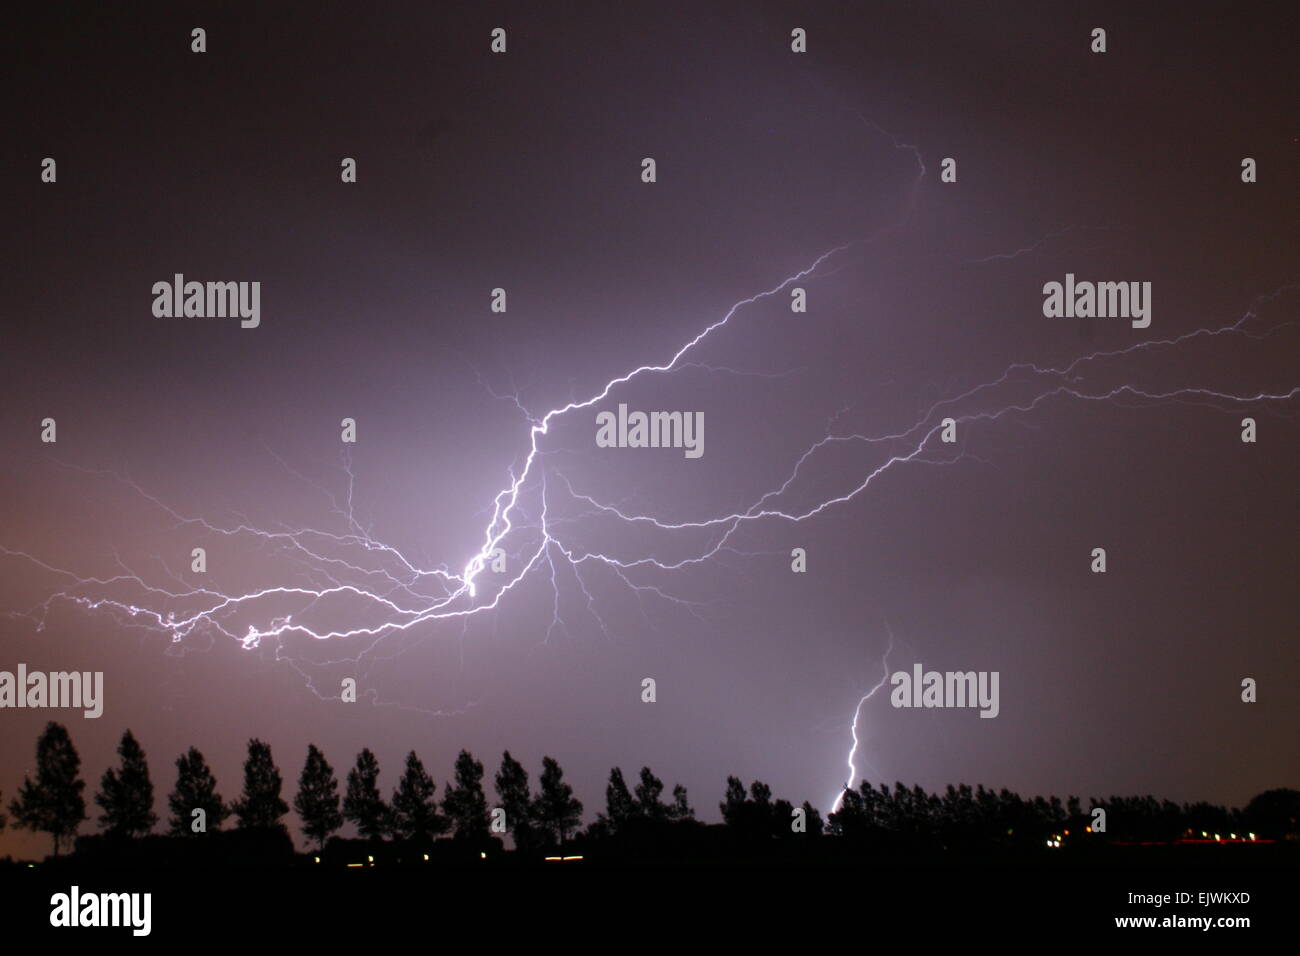 Severe lightning strikes close by causing a purple color in the clouded sky. Stock Photo